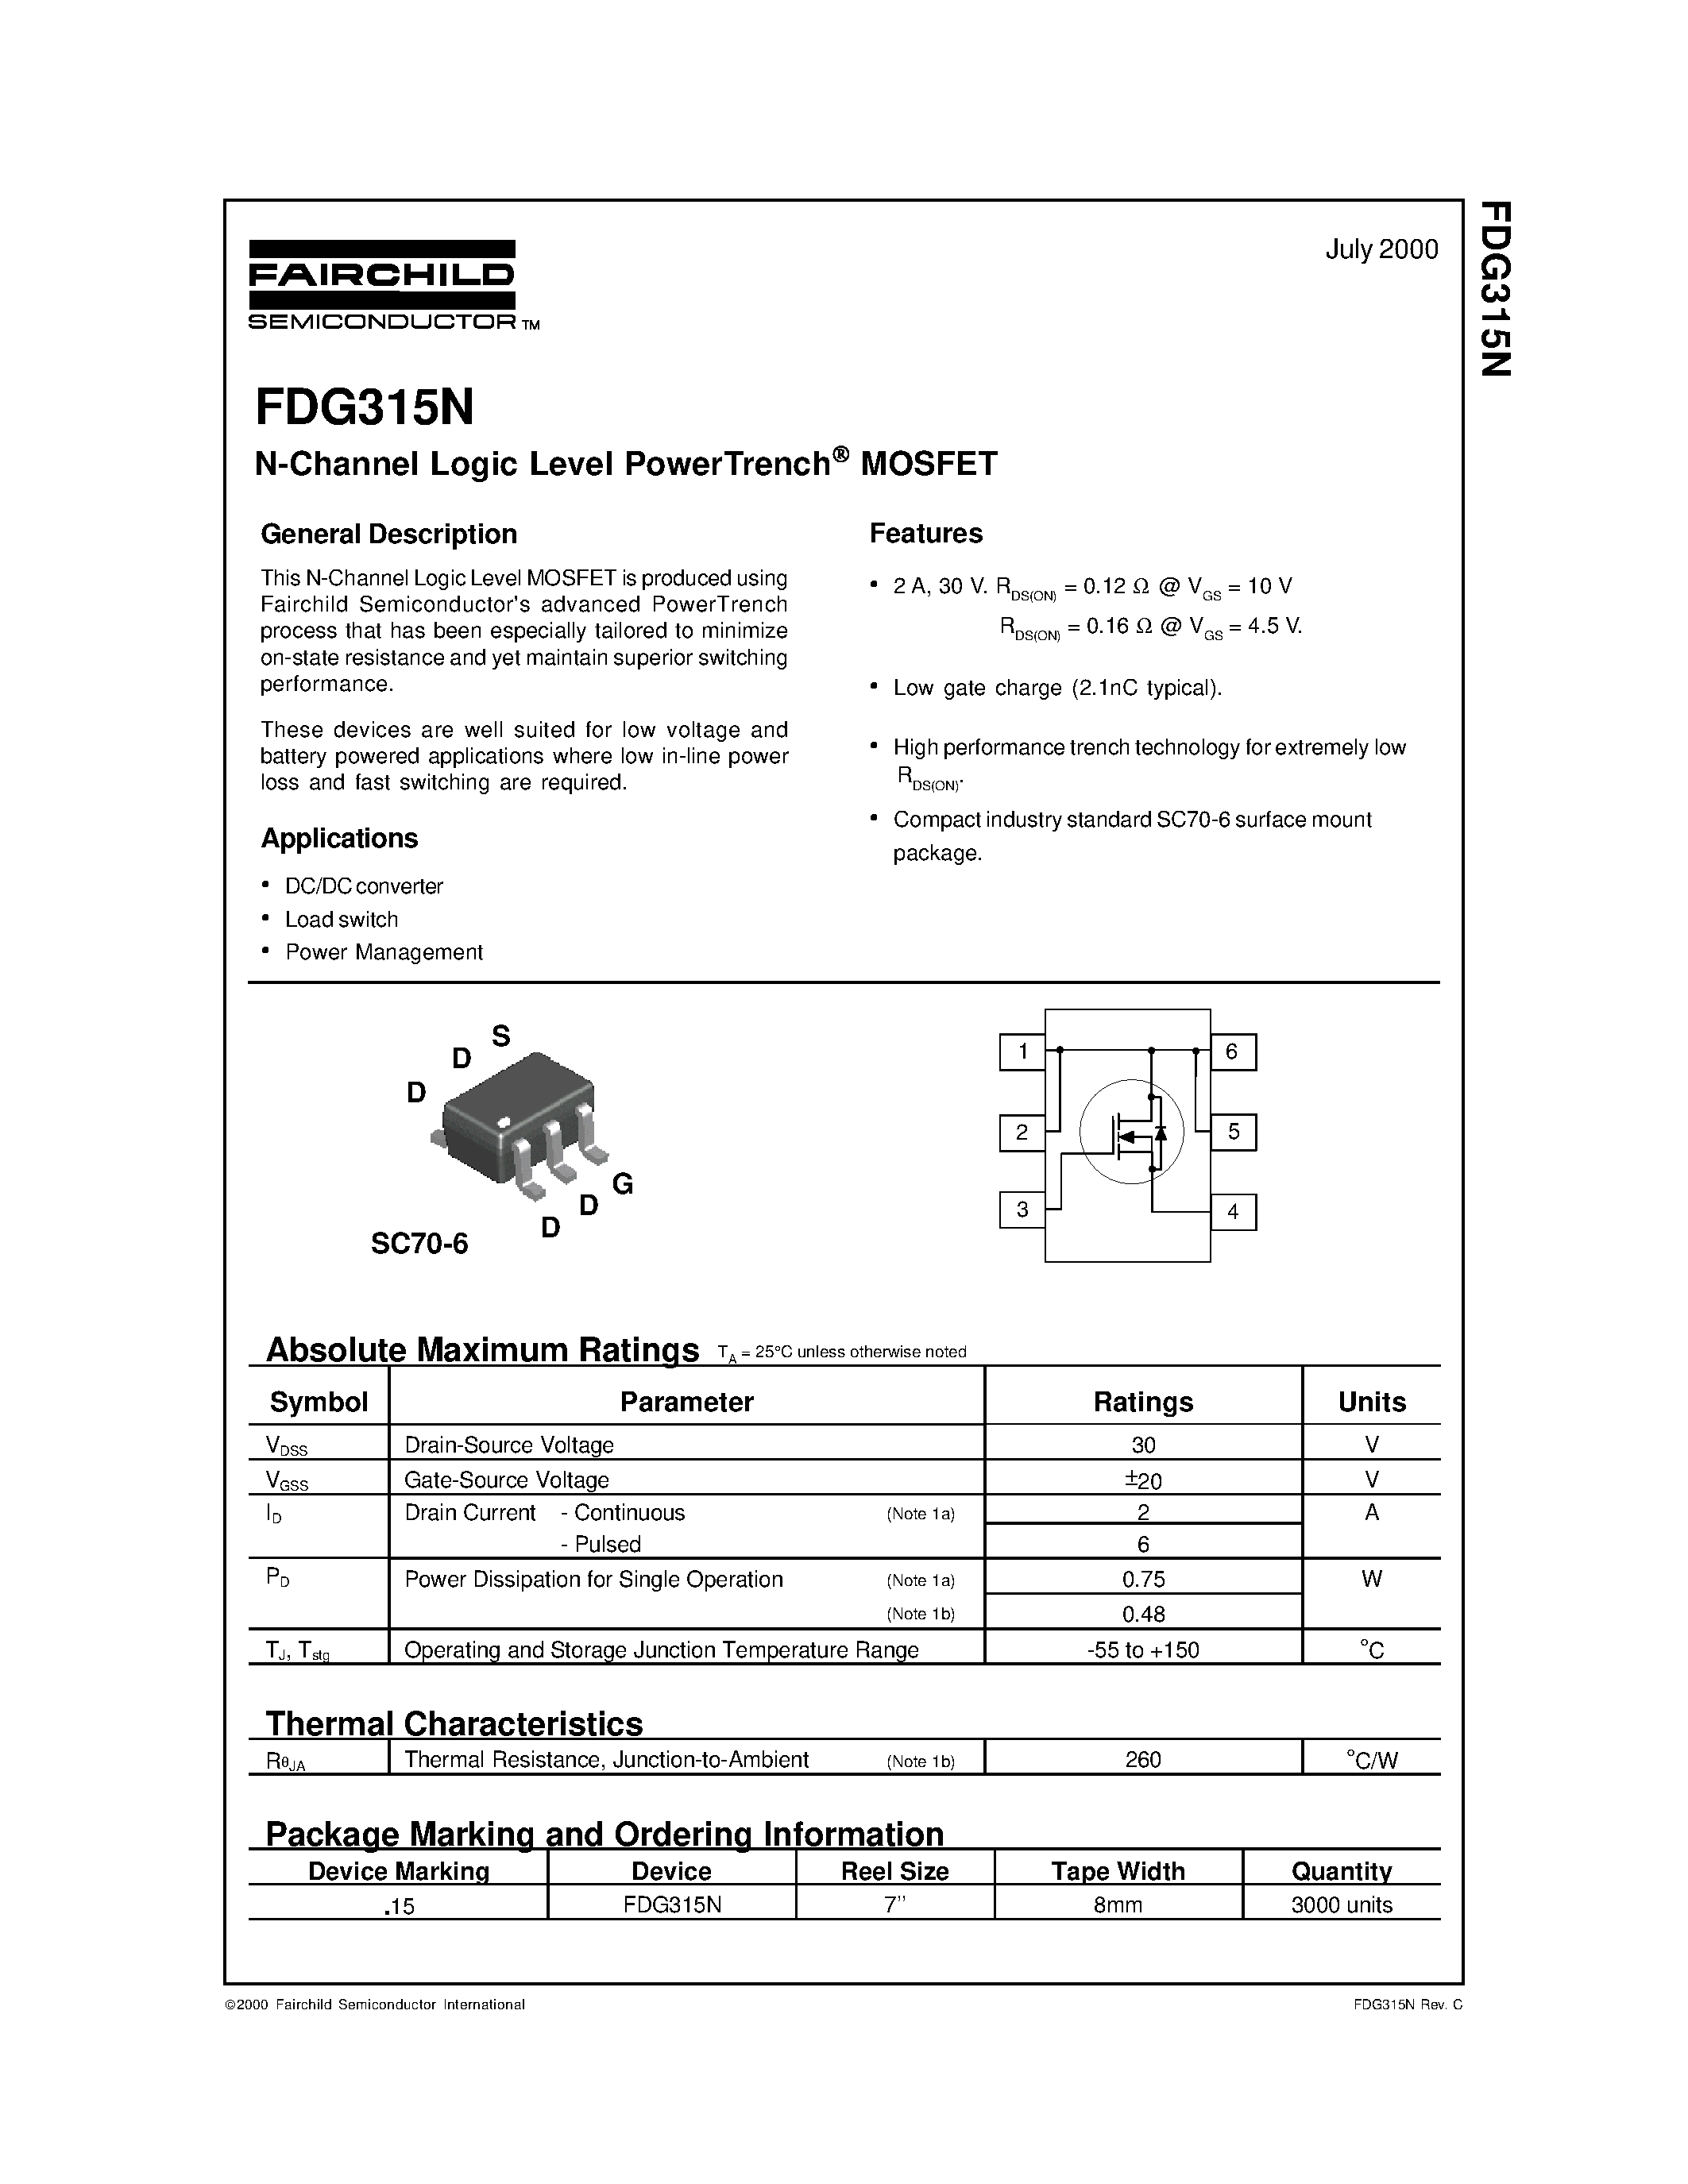 Datasheet FDG315 - N-Channel Logic Level PowerTrench MOSFET page 1